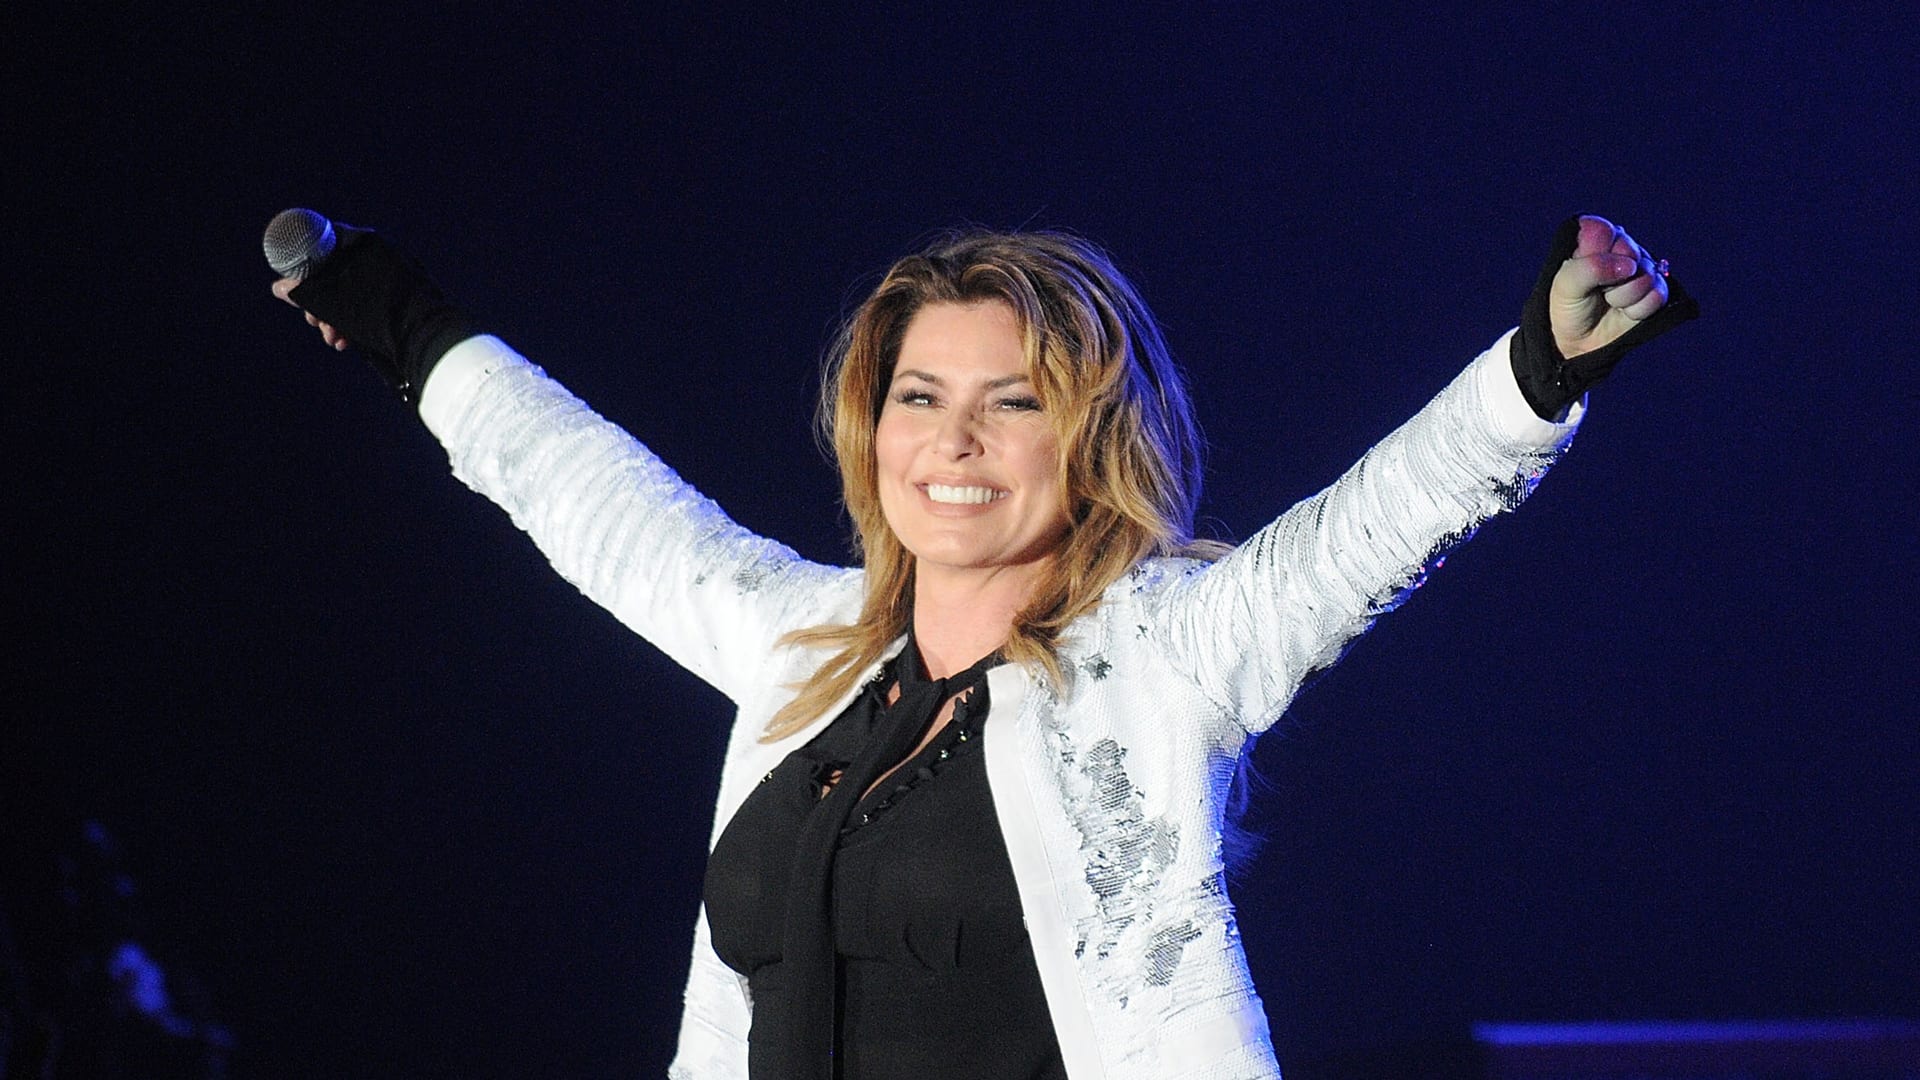 Why Shania Twain’s Apology Can’t Un-Ring The Trump Bell